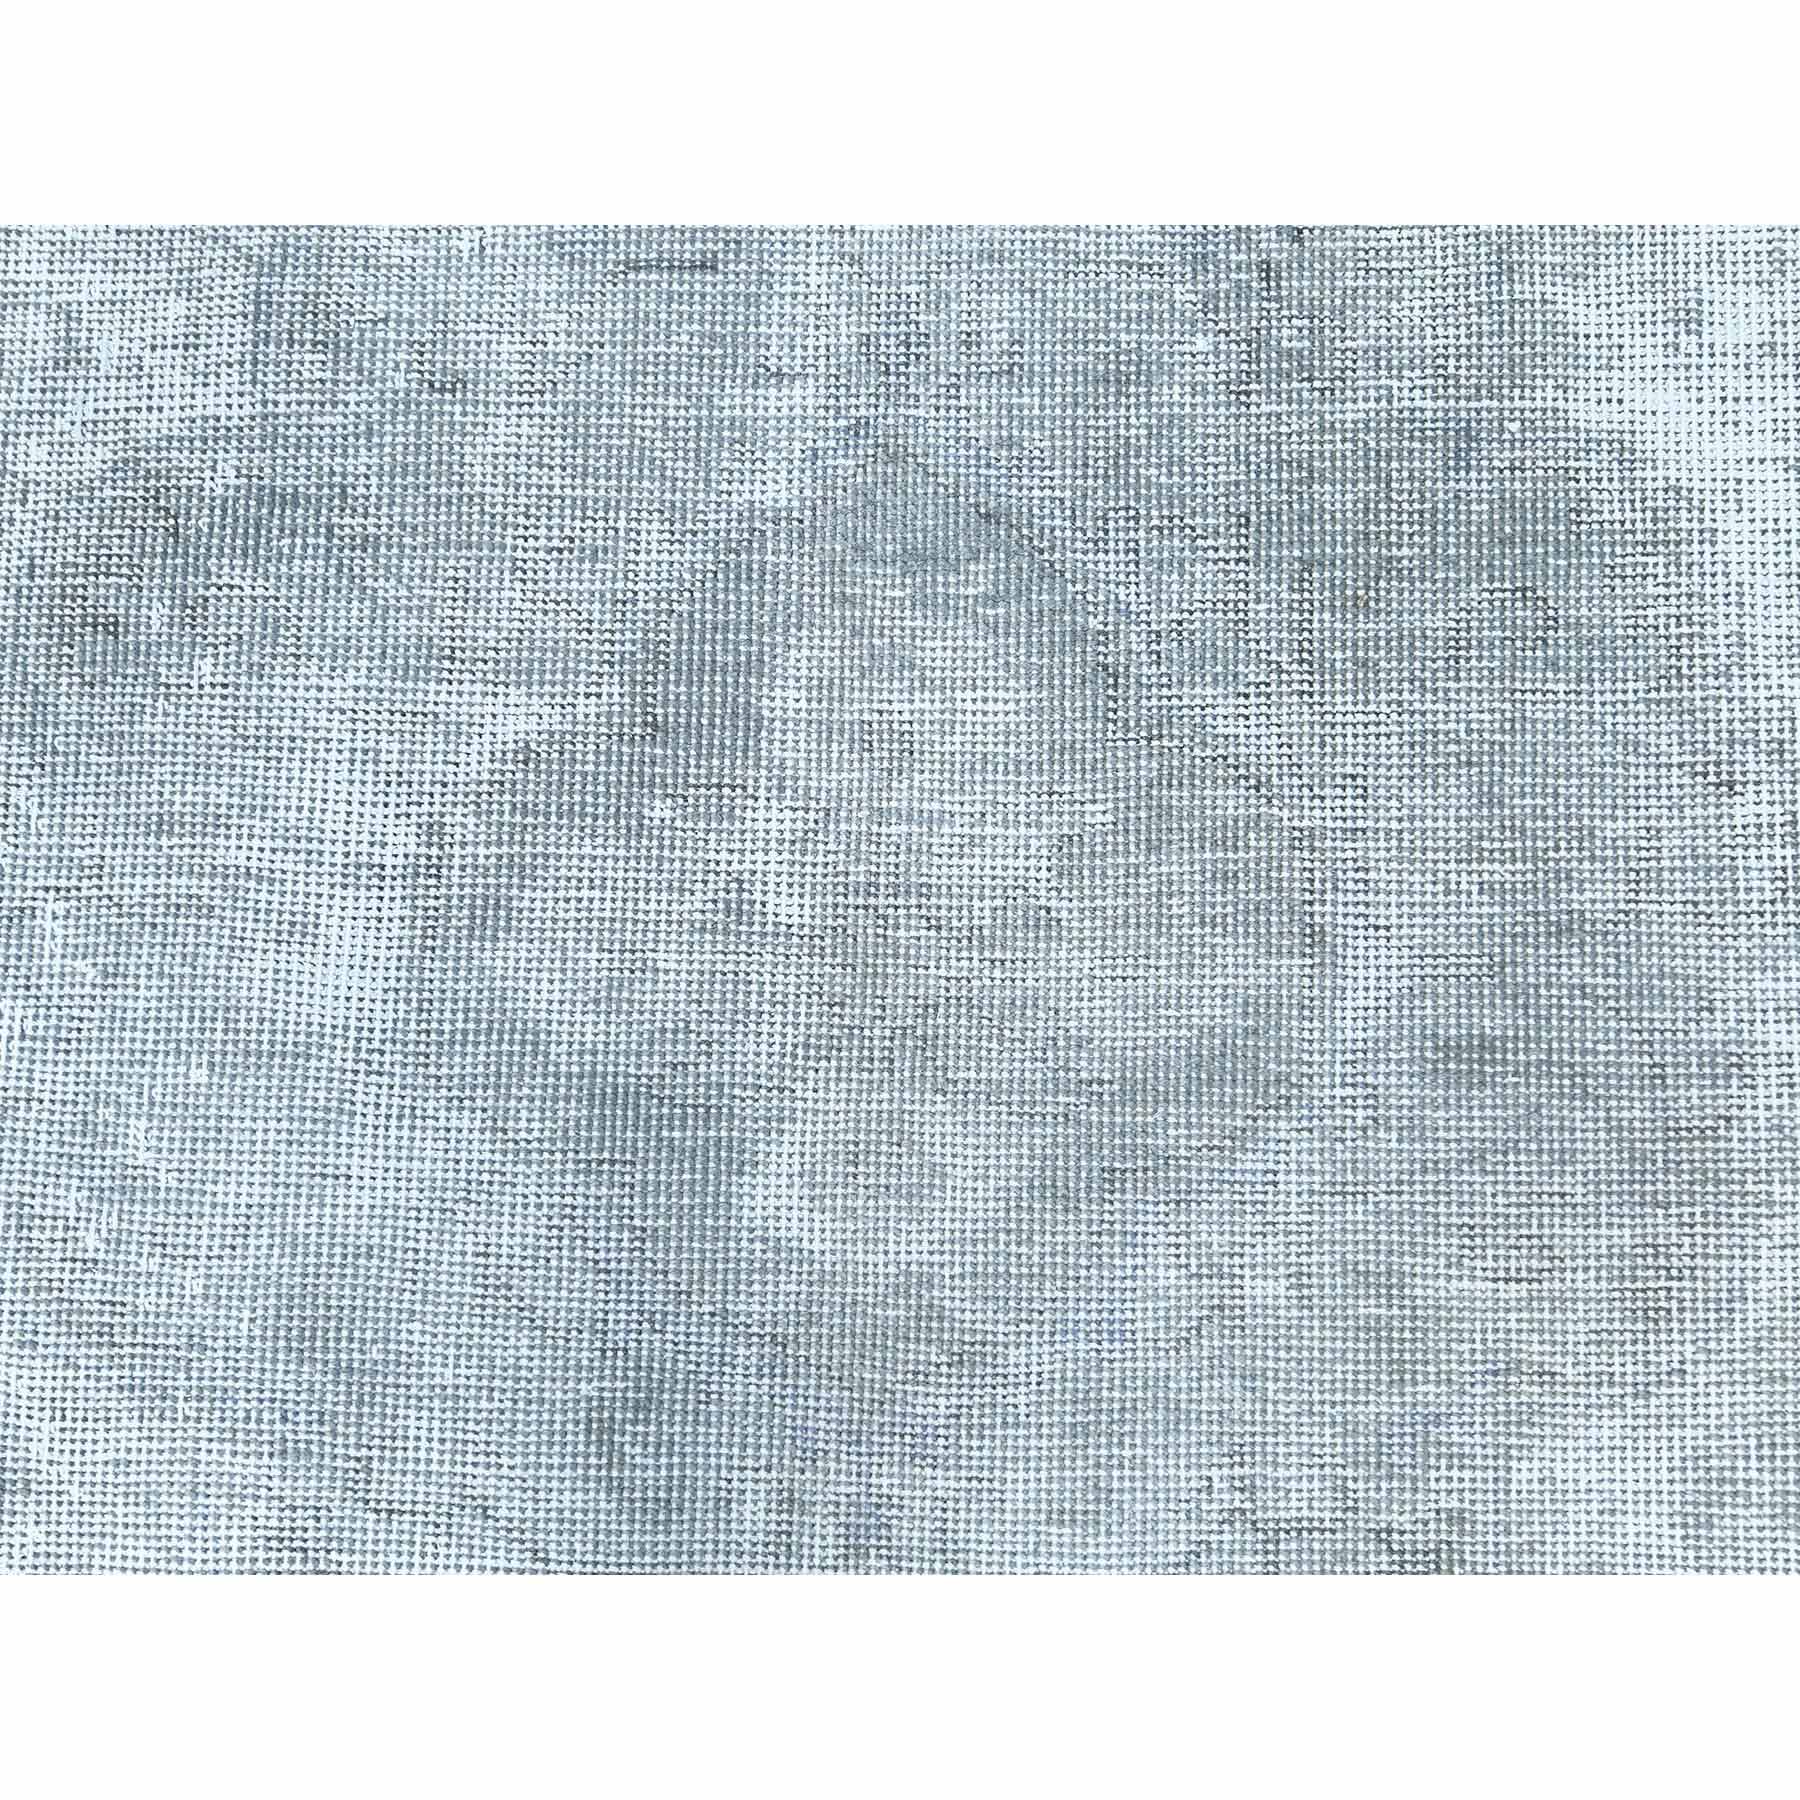 Overdyed-Vintage-Hand-Knotted-Rug-411695